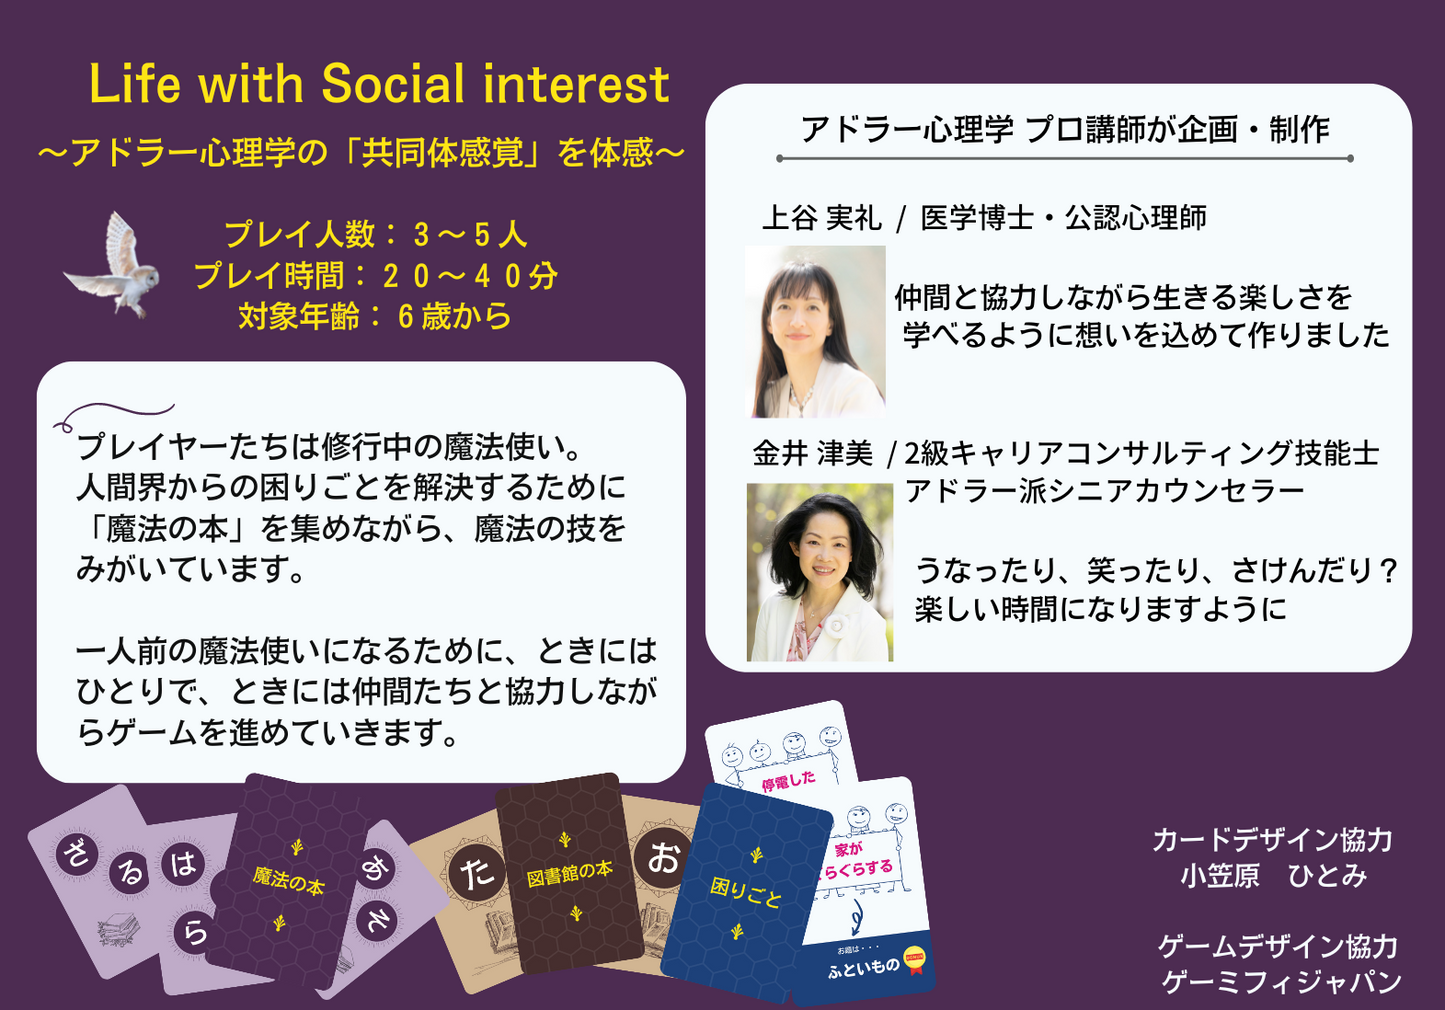 Life with Social interest（LwSi：ルーシー）